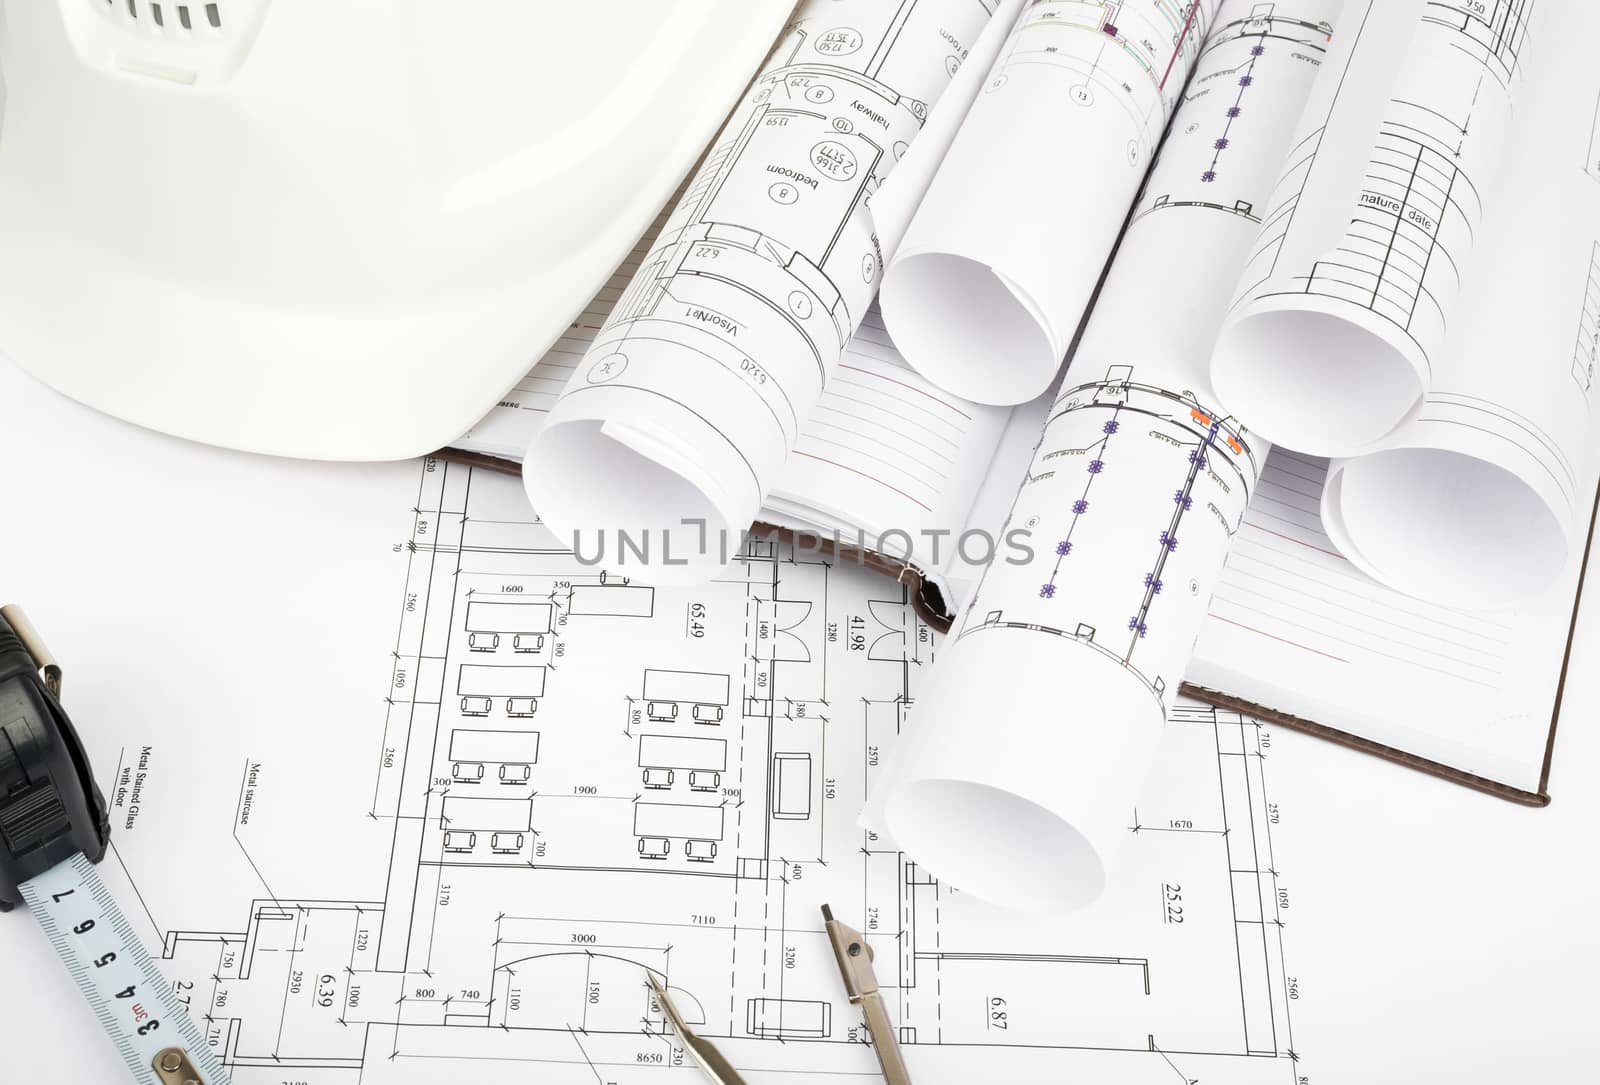 Architecture plan and rolls of blueprints with hard hat and divider. Building concept